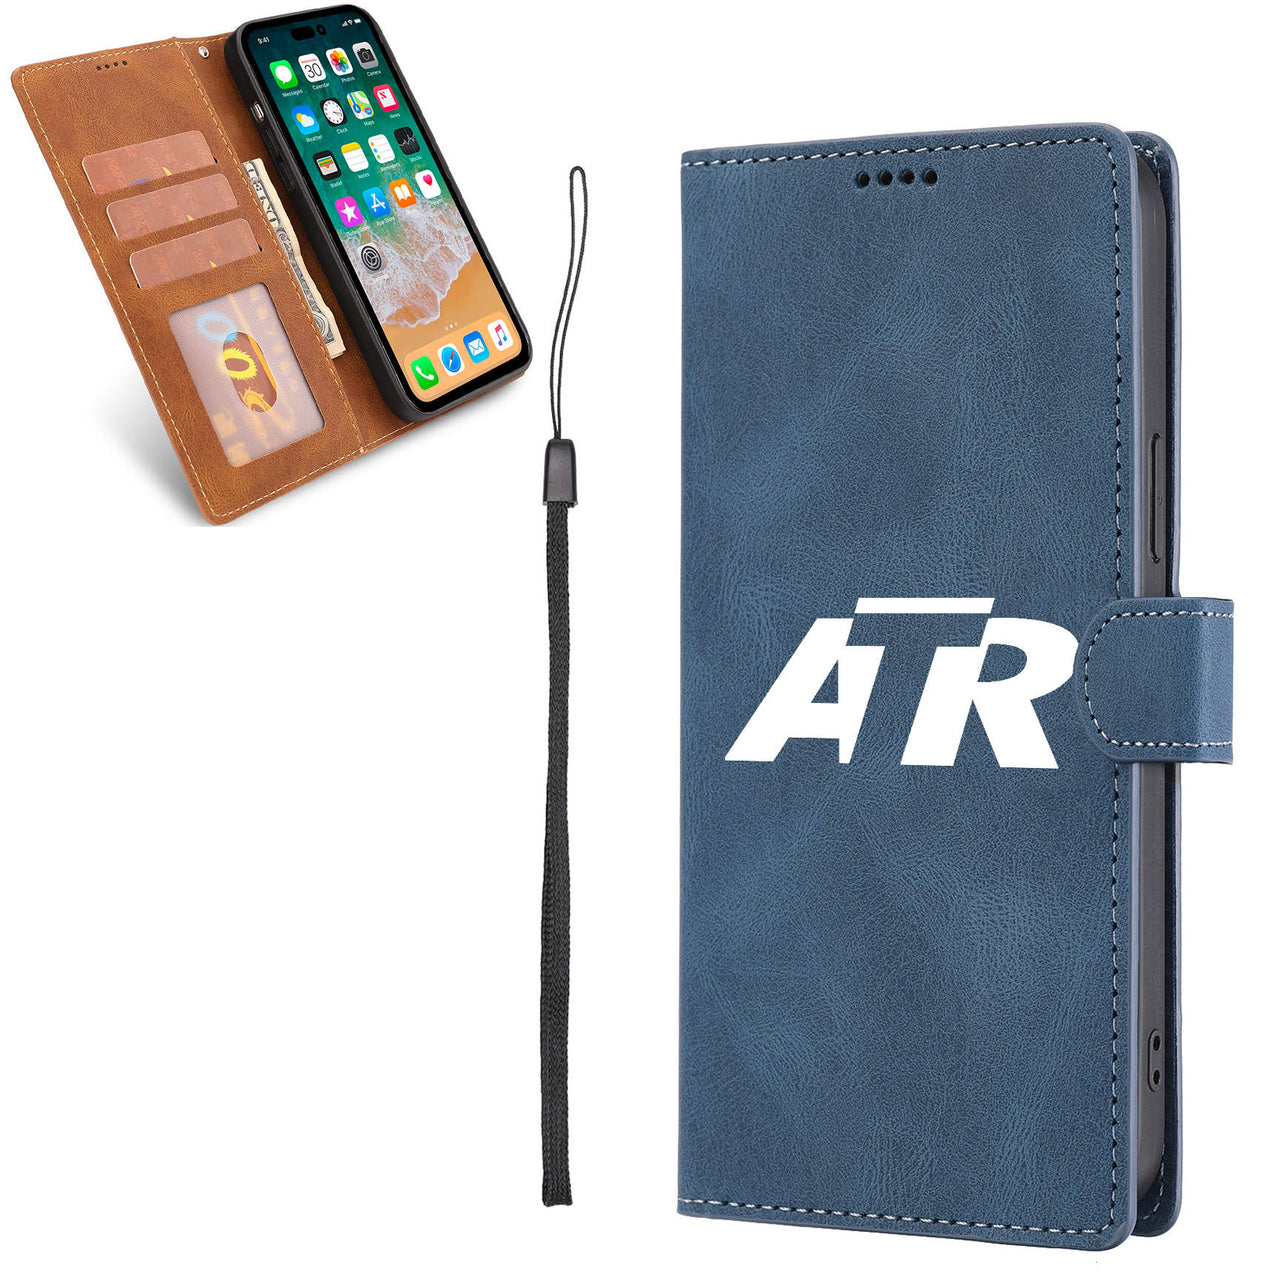 ATR & Text Designed Leather iPhone Cases